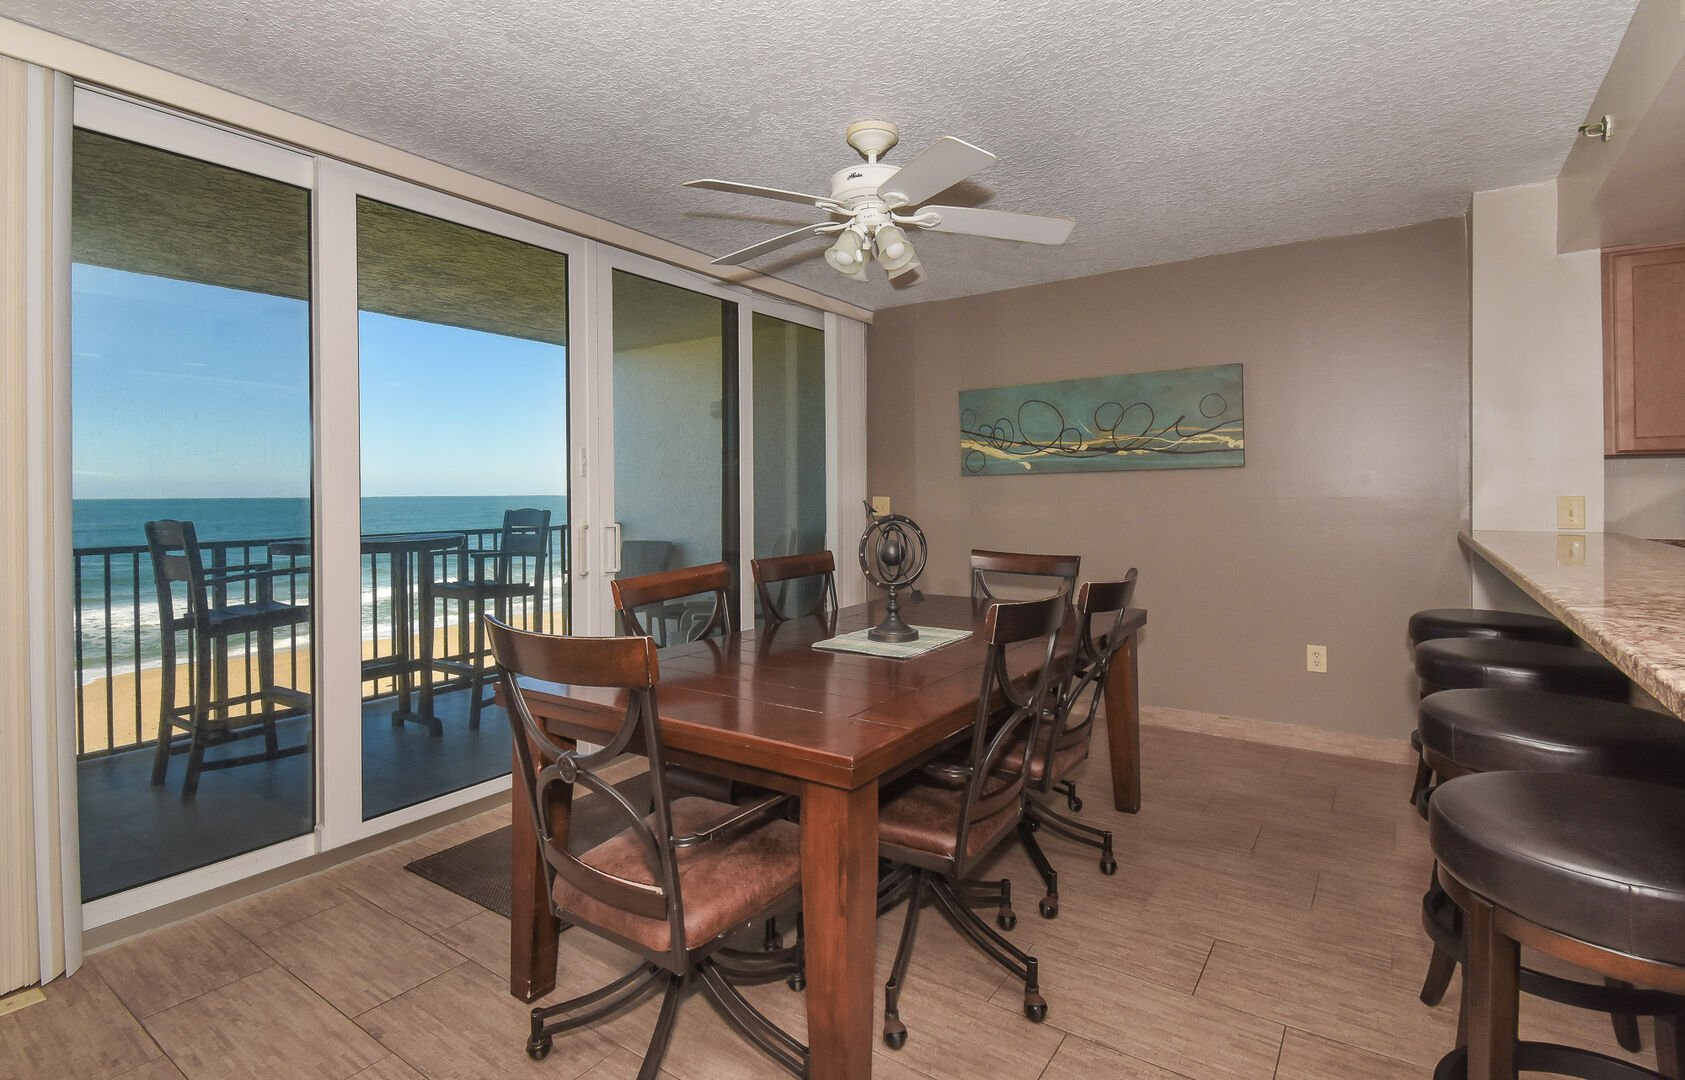 dining room table and dining area with balcony access